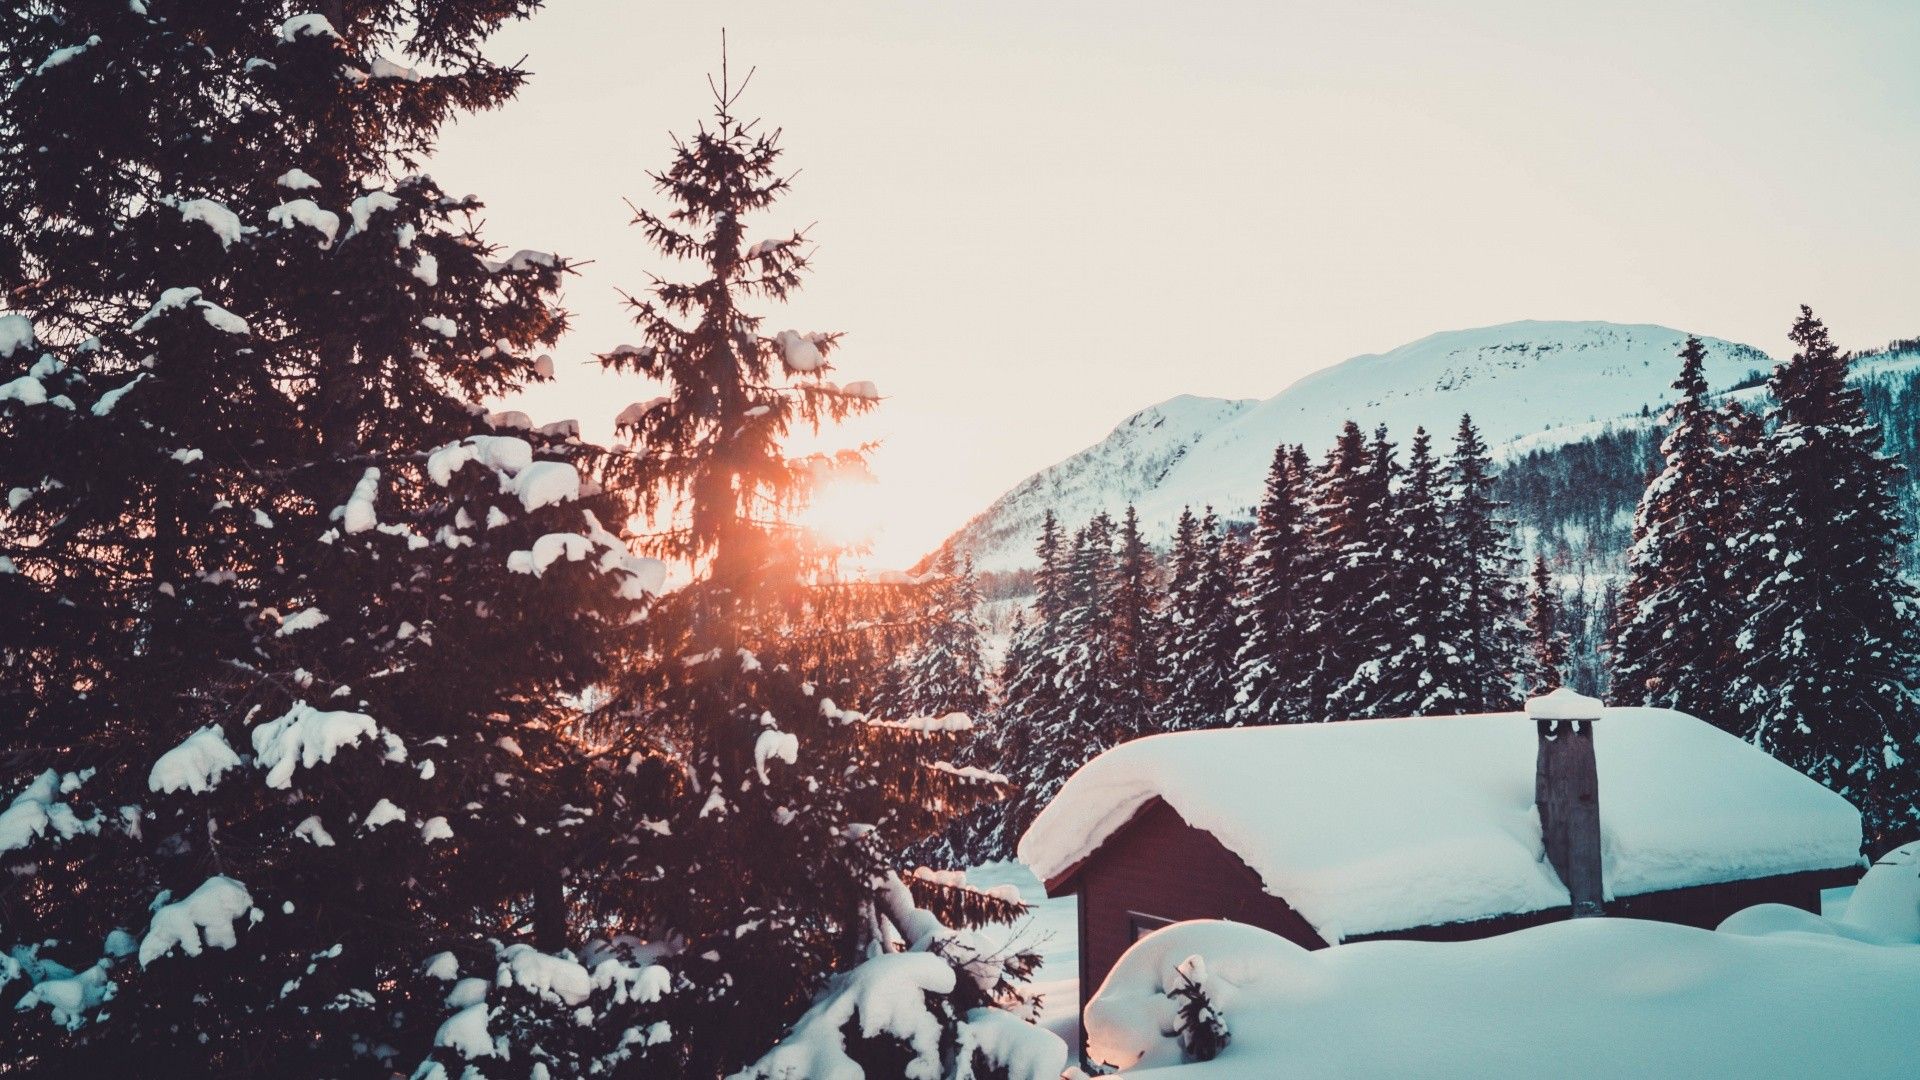 A cabin in the snow with the sun setting behind it - Landscape